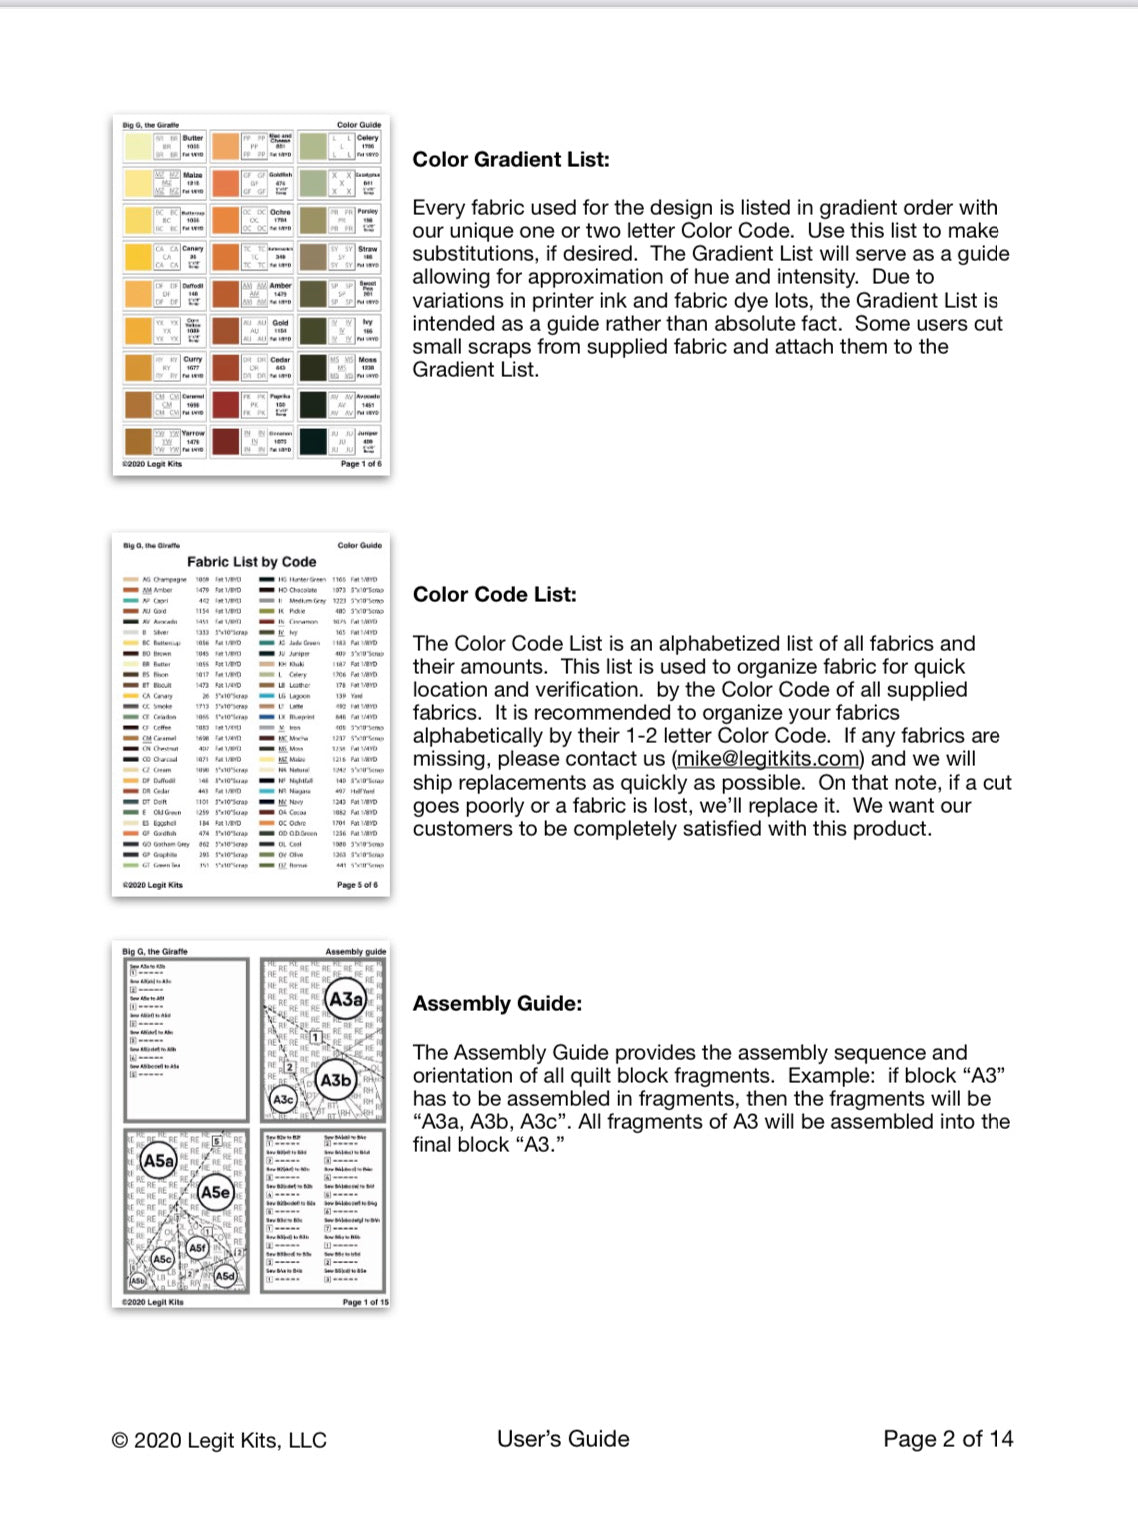 Excerpt from the user's guide.  A highly detailed document that walks the user through every step of the process for completing a legit kits quilt top.